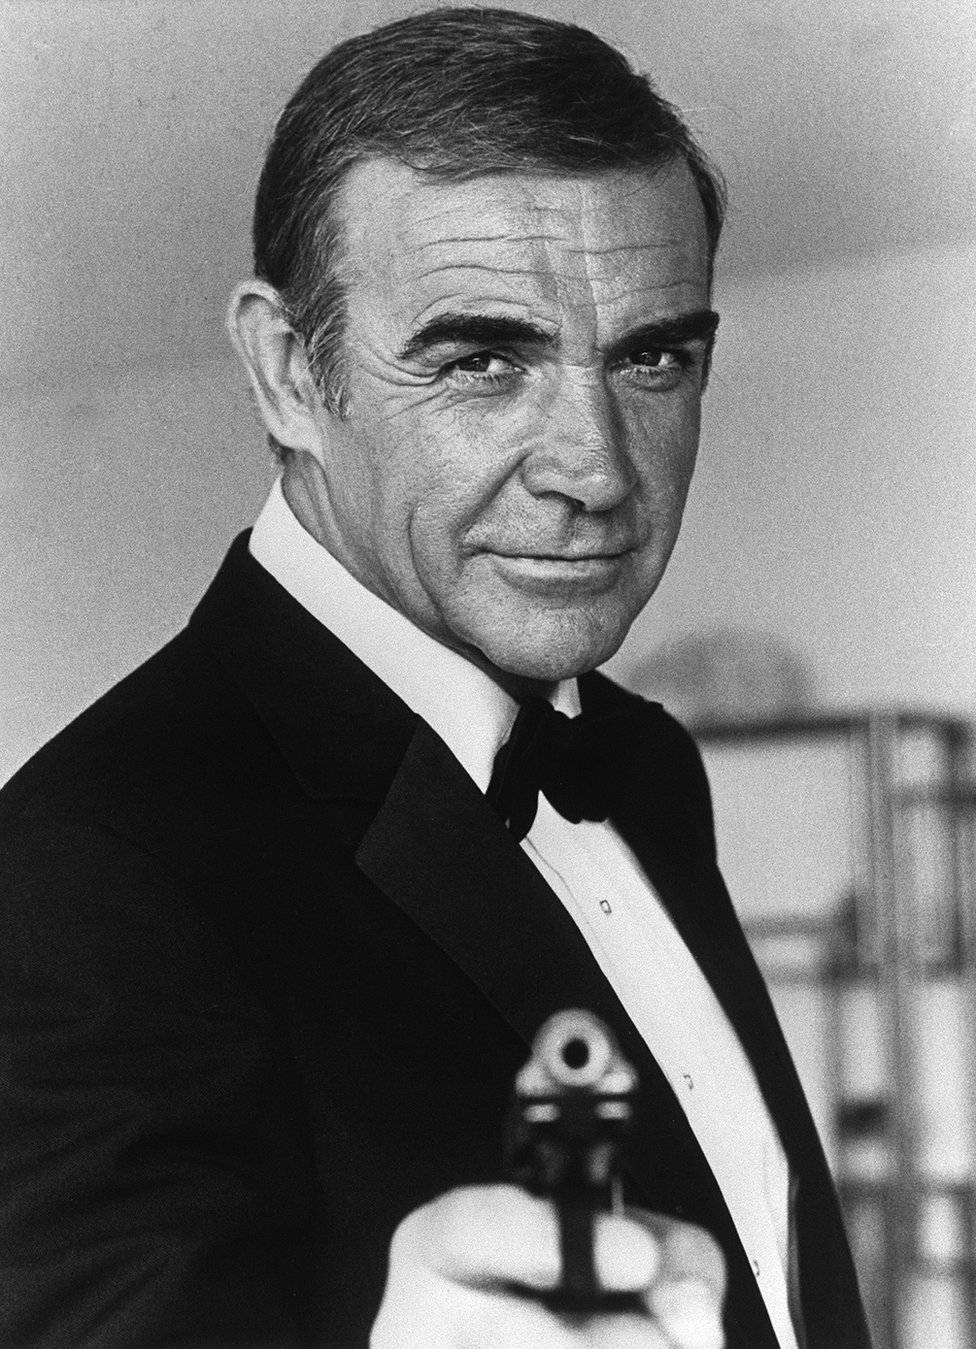 Sean Connery in Never Say Never Again